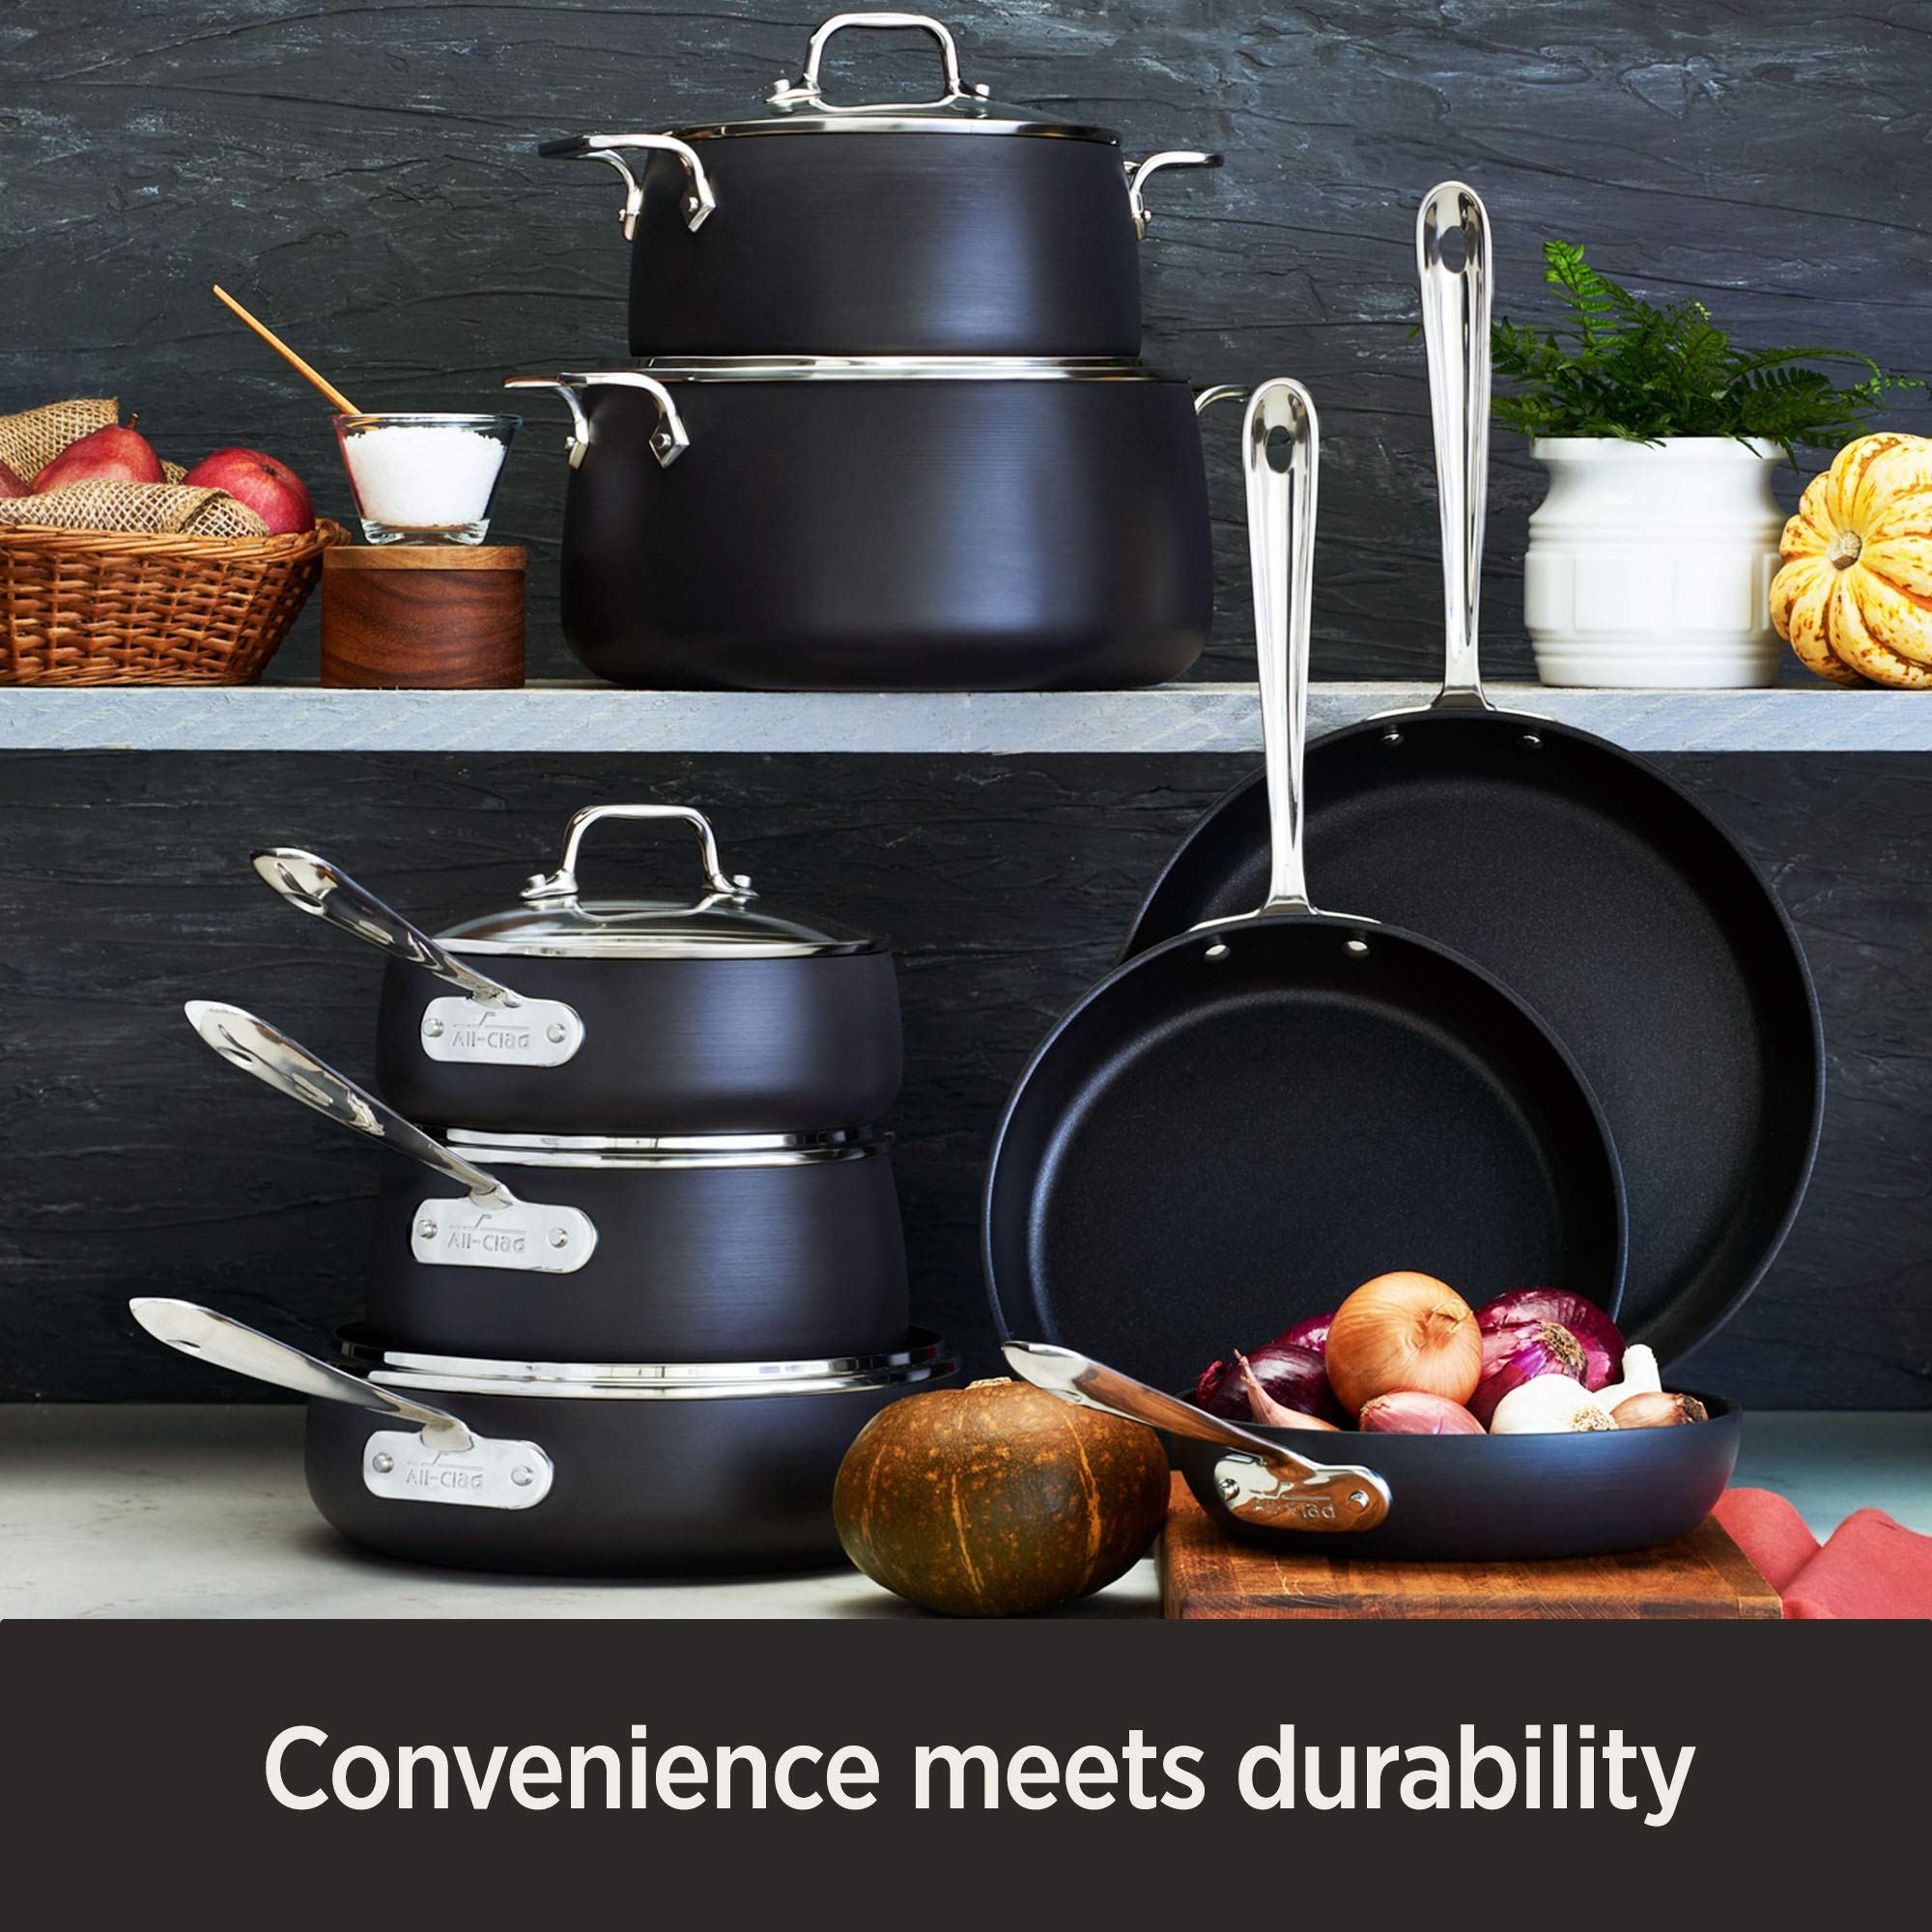 All-Clad HA1 Hard Anodized Nonstick Cookware Set 8 Piece Induction Pots and Pans Black